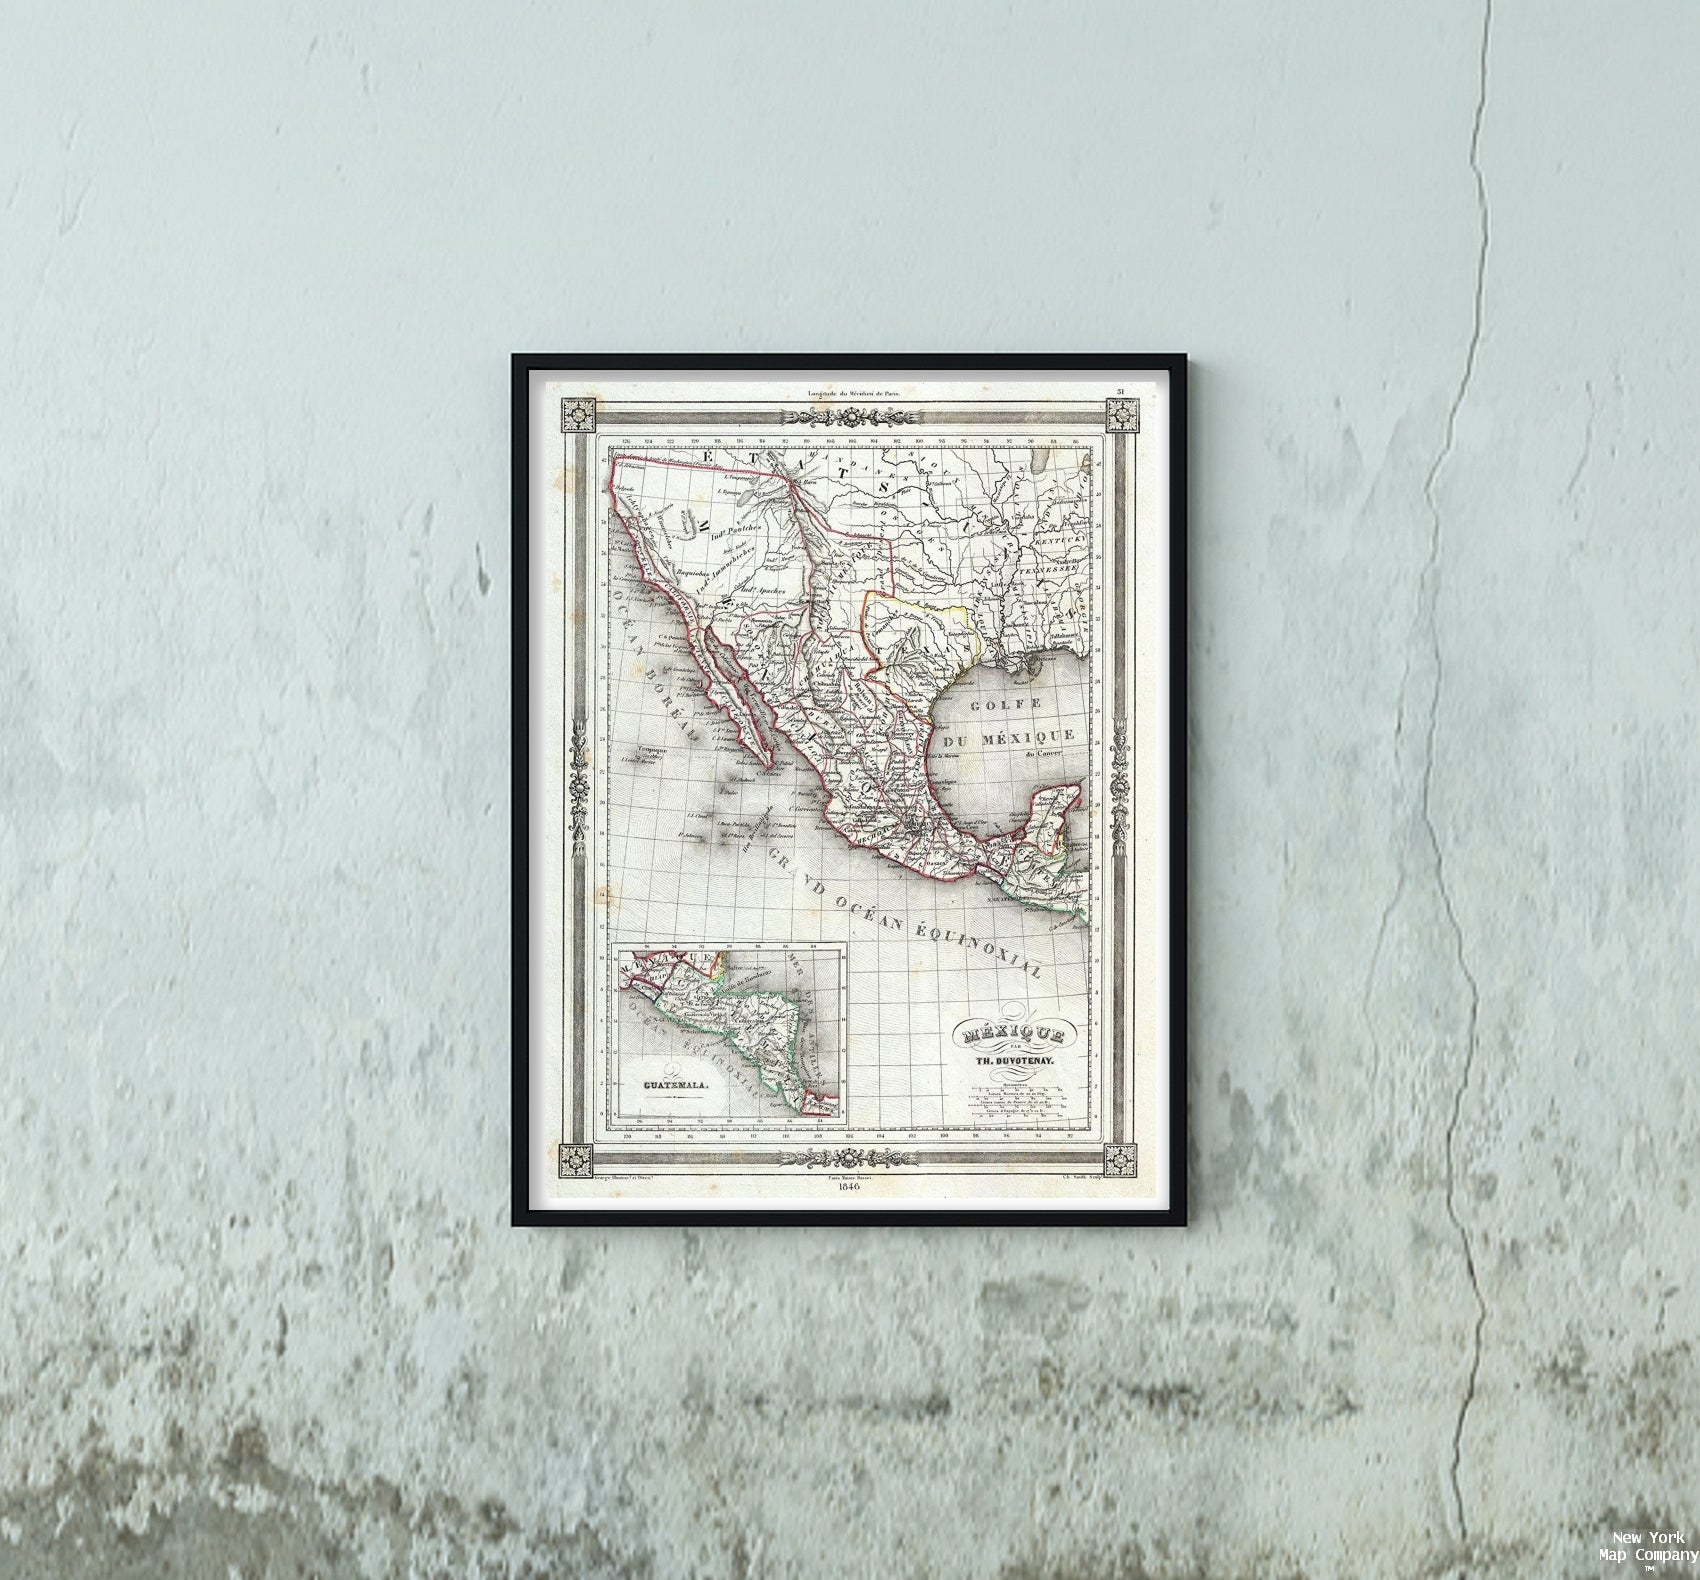 This is a highly desirable 1846 map of Mexico by Thunot Duvotenay. Duvotenay published several different editions of this Mexico map - this being the most desirable due to its depictions of the ephemeral Republic of Texas. The map covers all of modern da